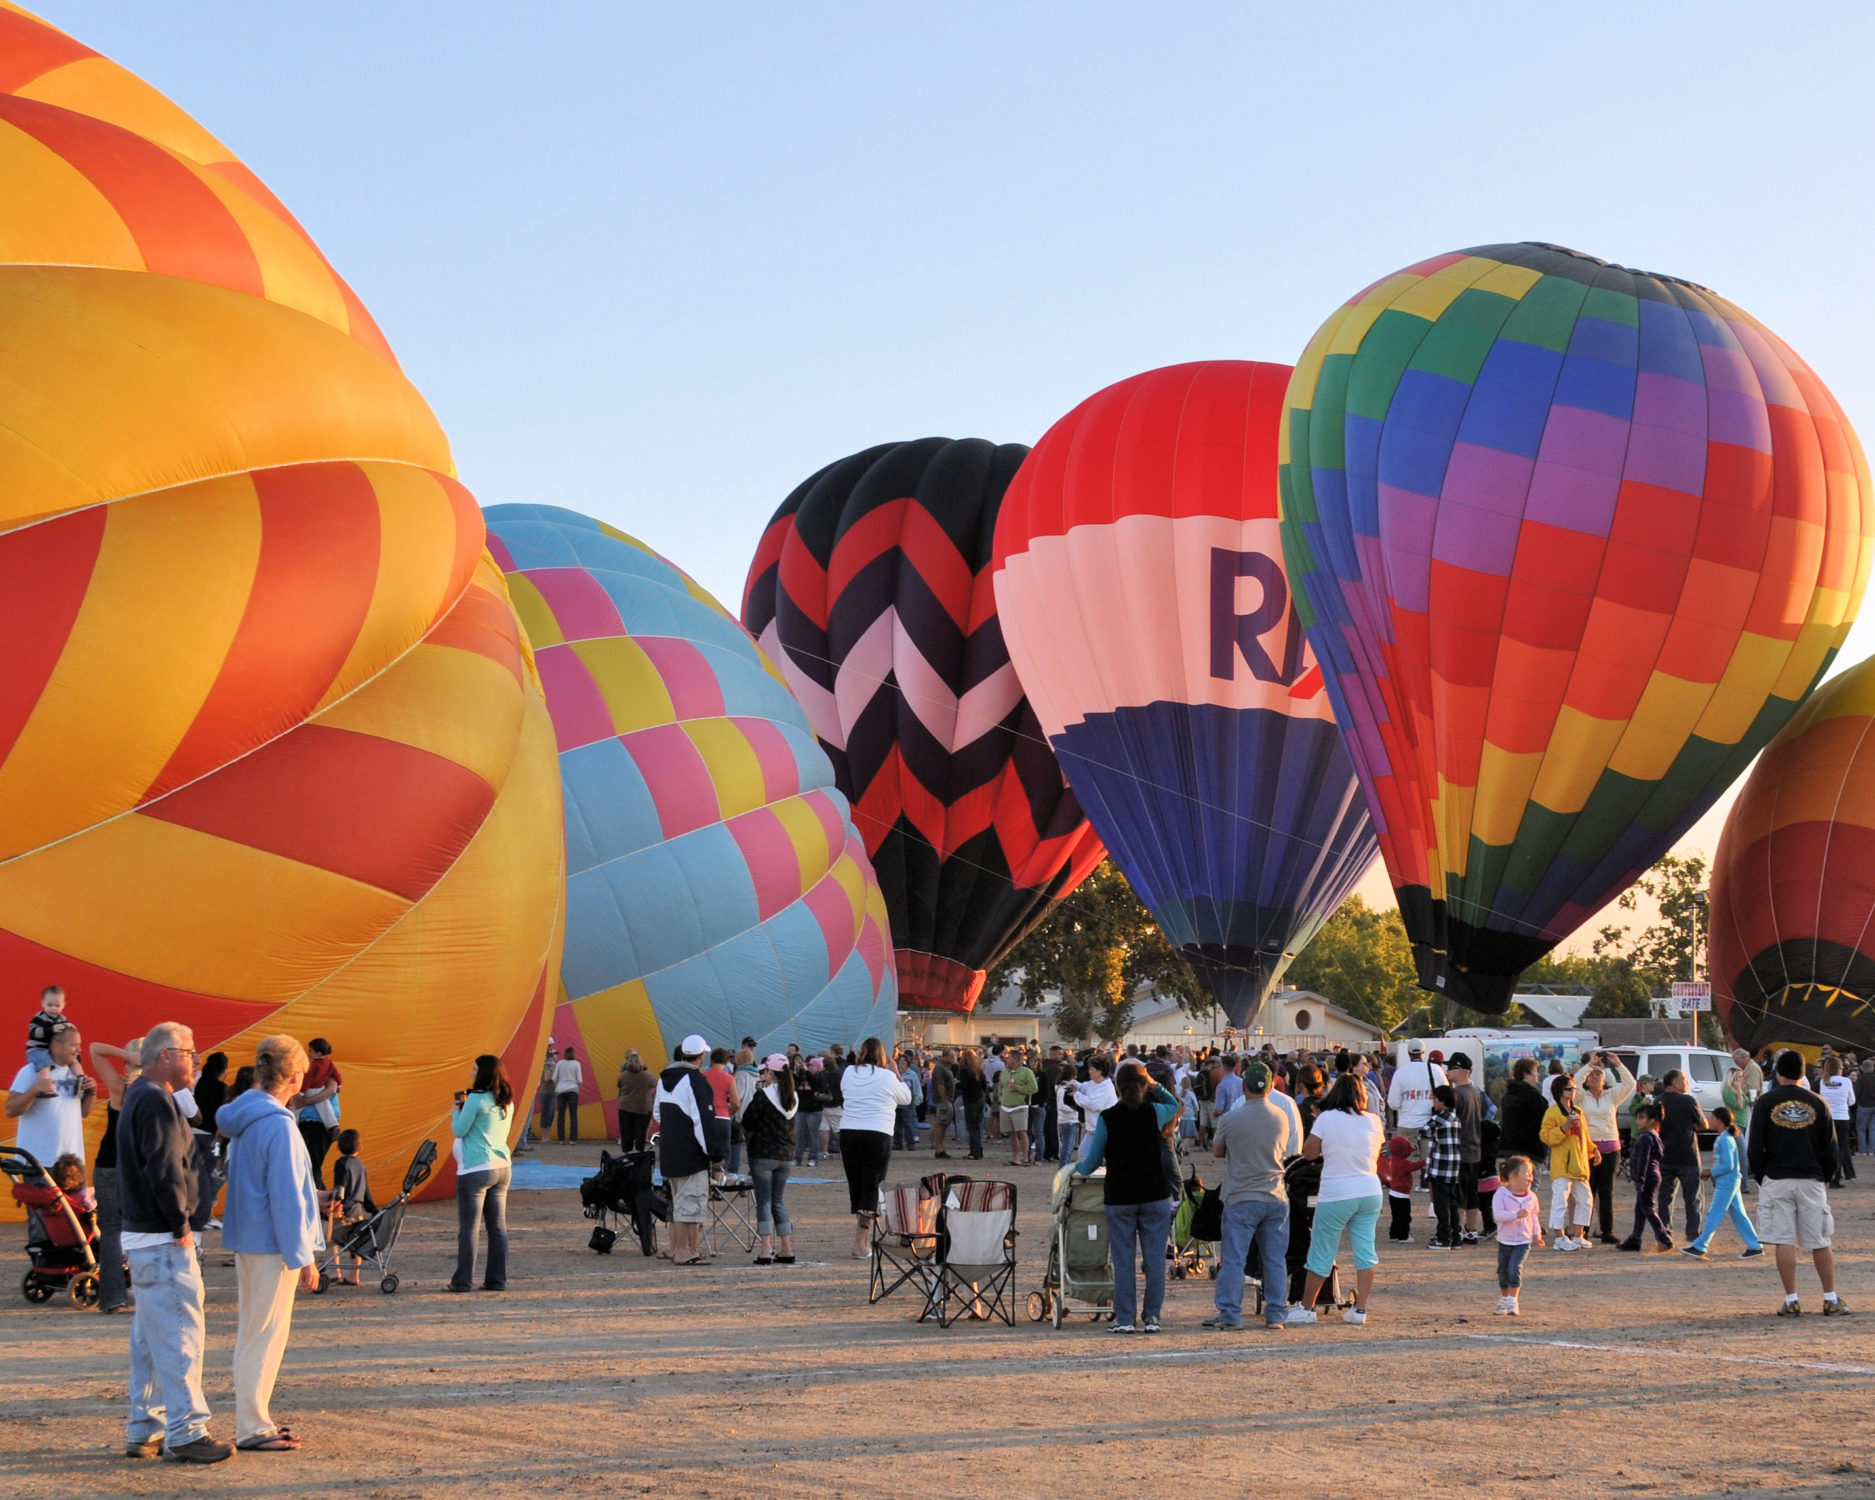 Don't miss ClovisFest & the Hot Air Balloon Fun Fly 2018 this October!